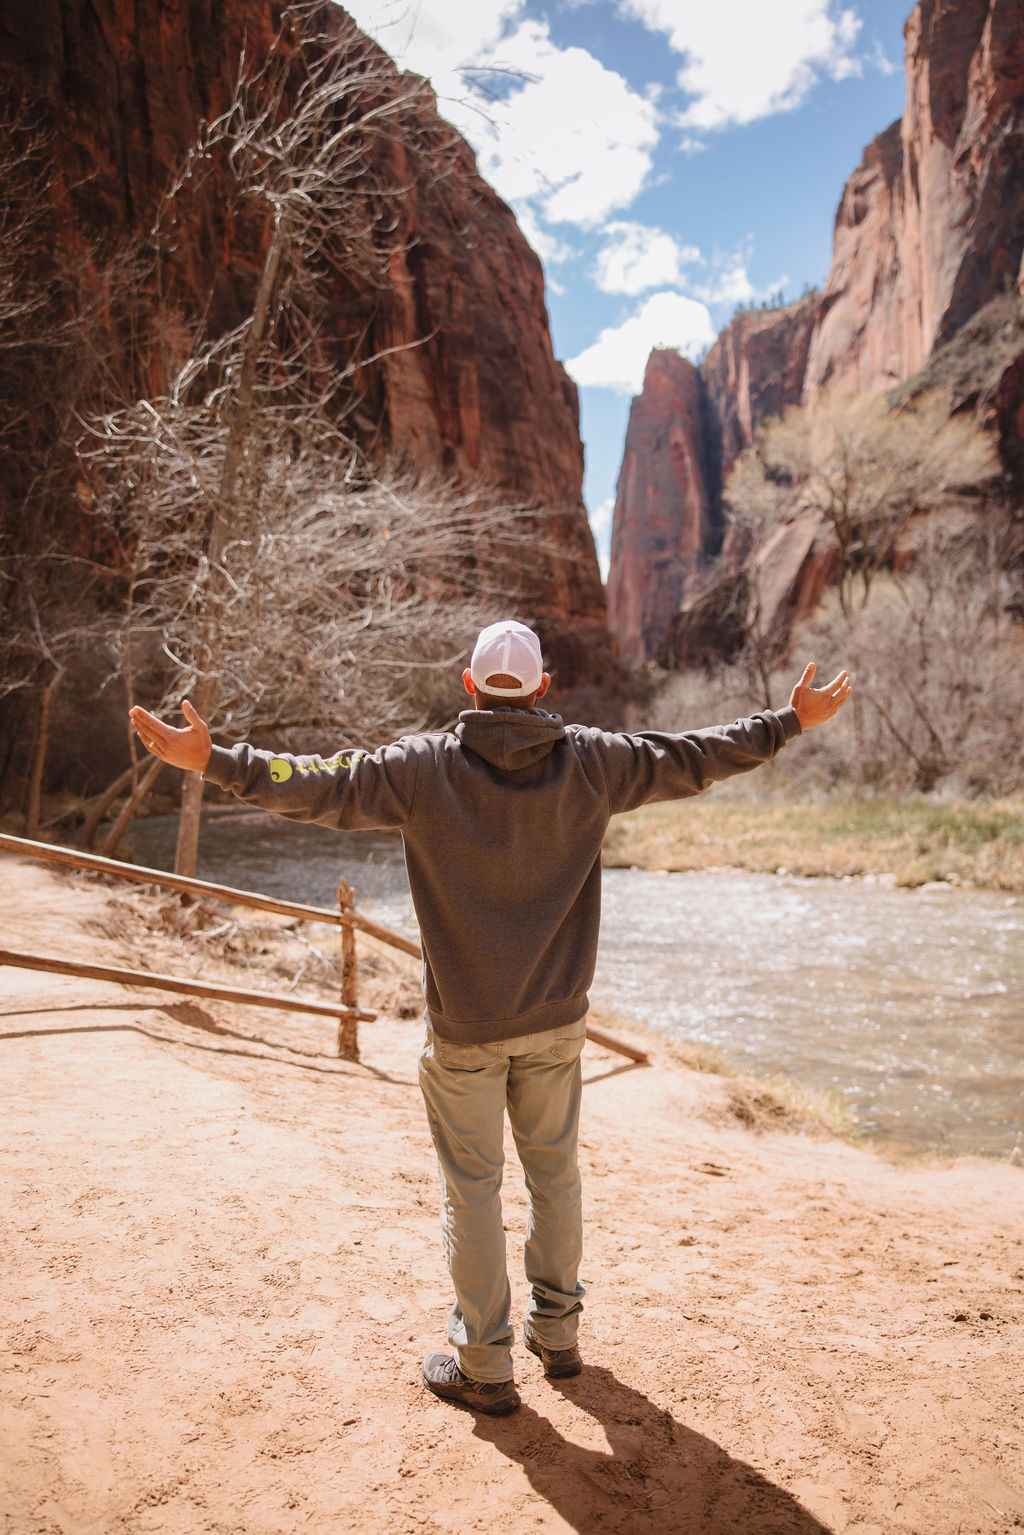 A man in a cap and jacket stands with arms outstretched facing a river and red rock canyon walls.